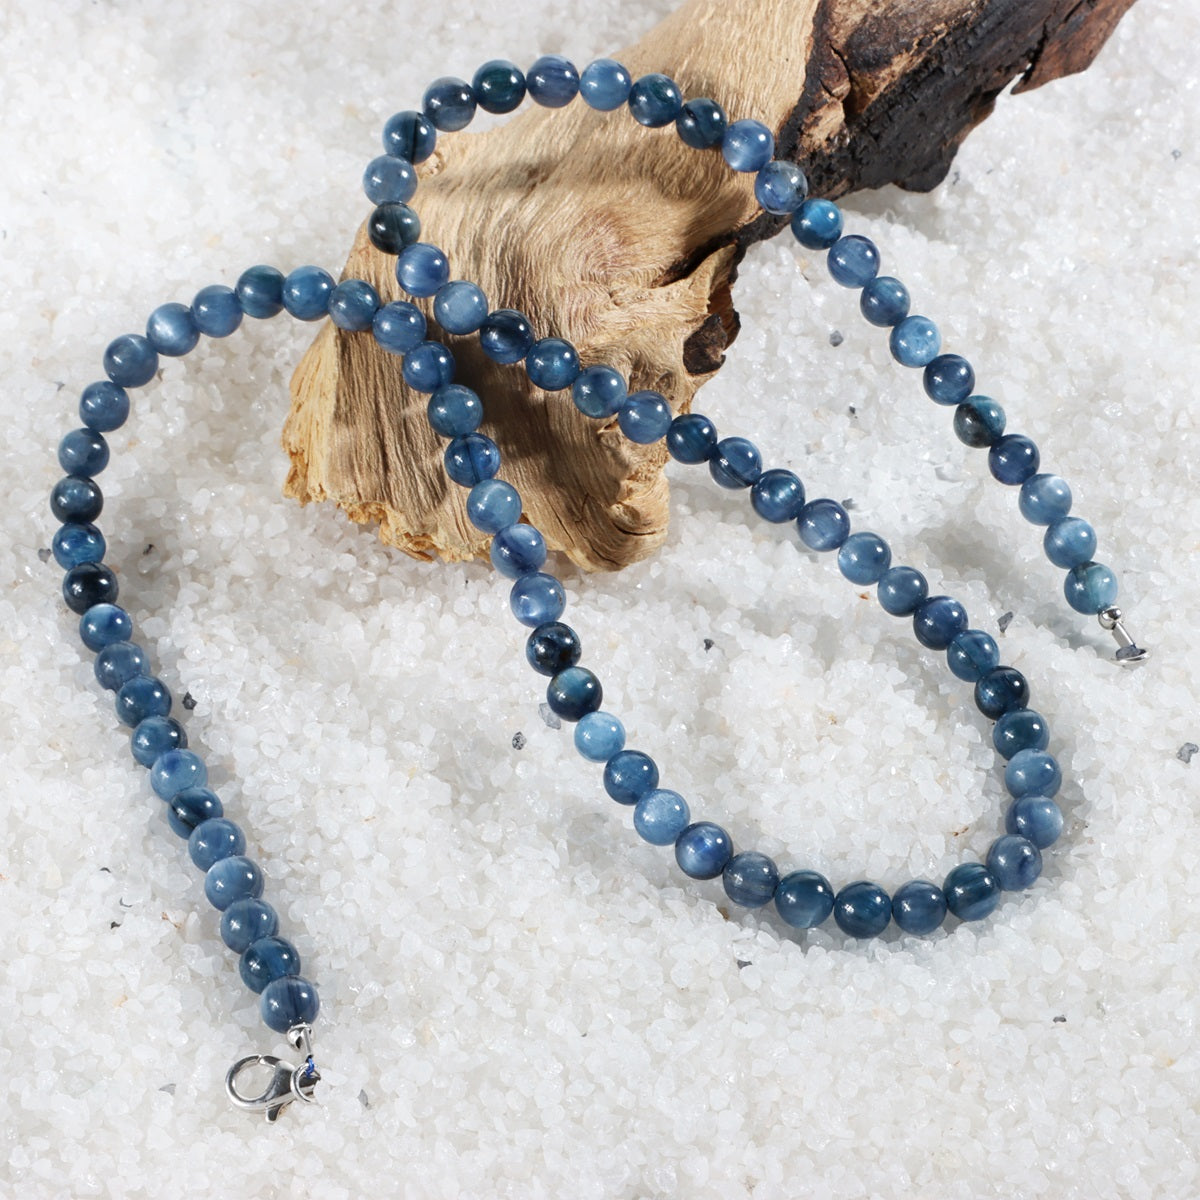 Kyanite Jewelry - Elegant and Ethereal Statement Piece